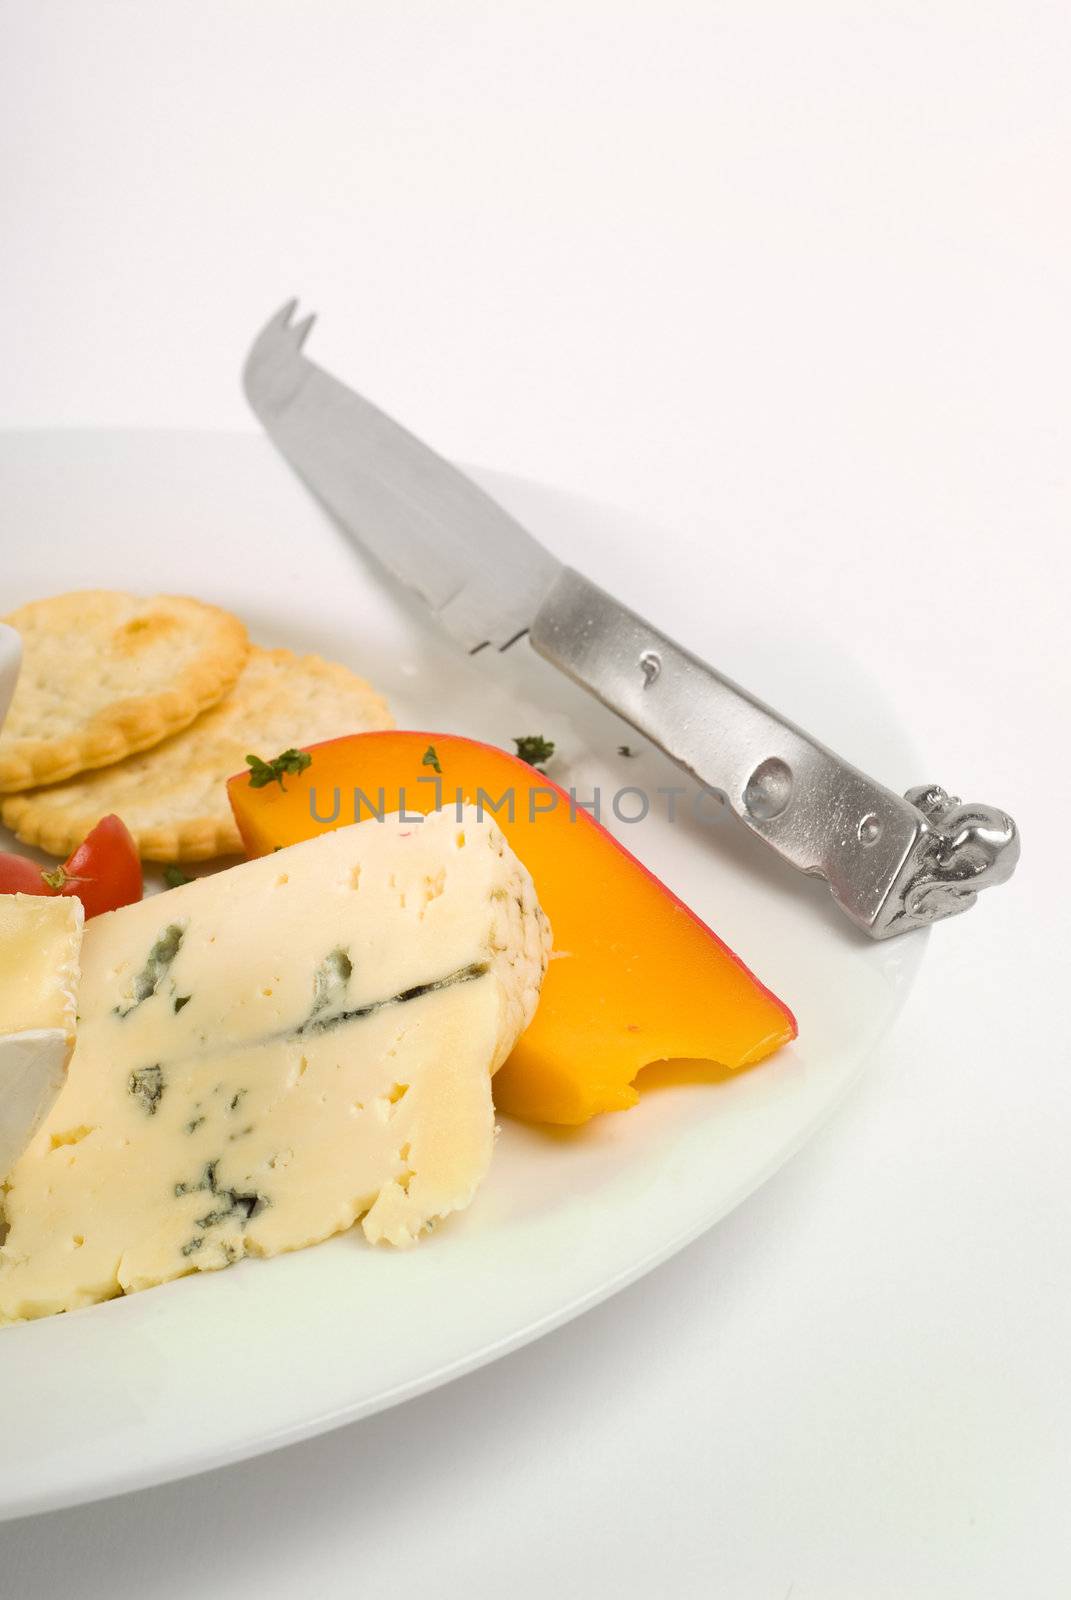 Cheese platter with various cheeses and knife